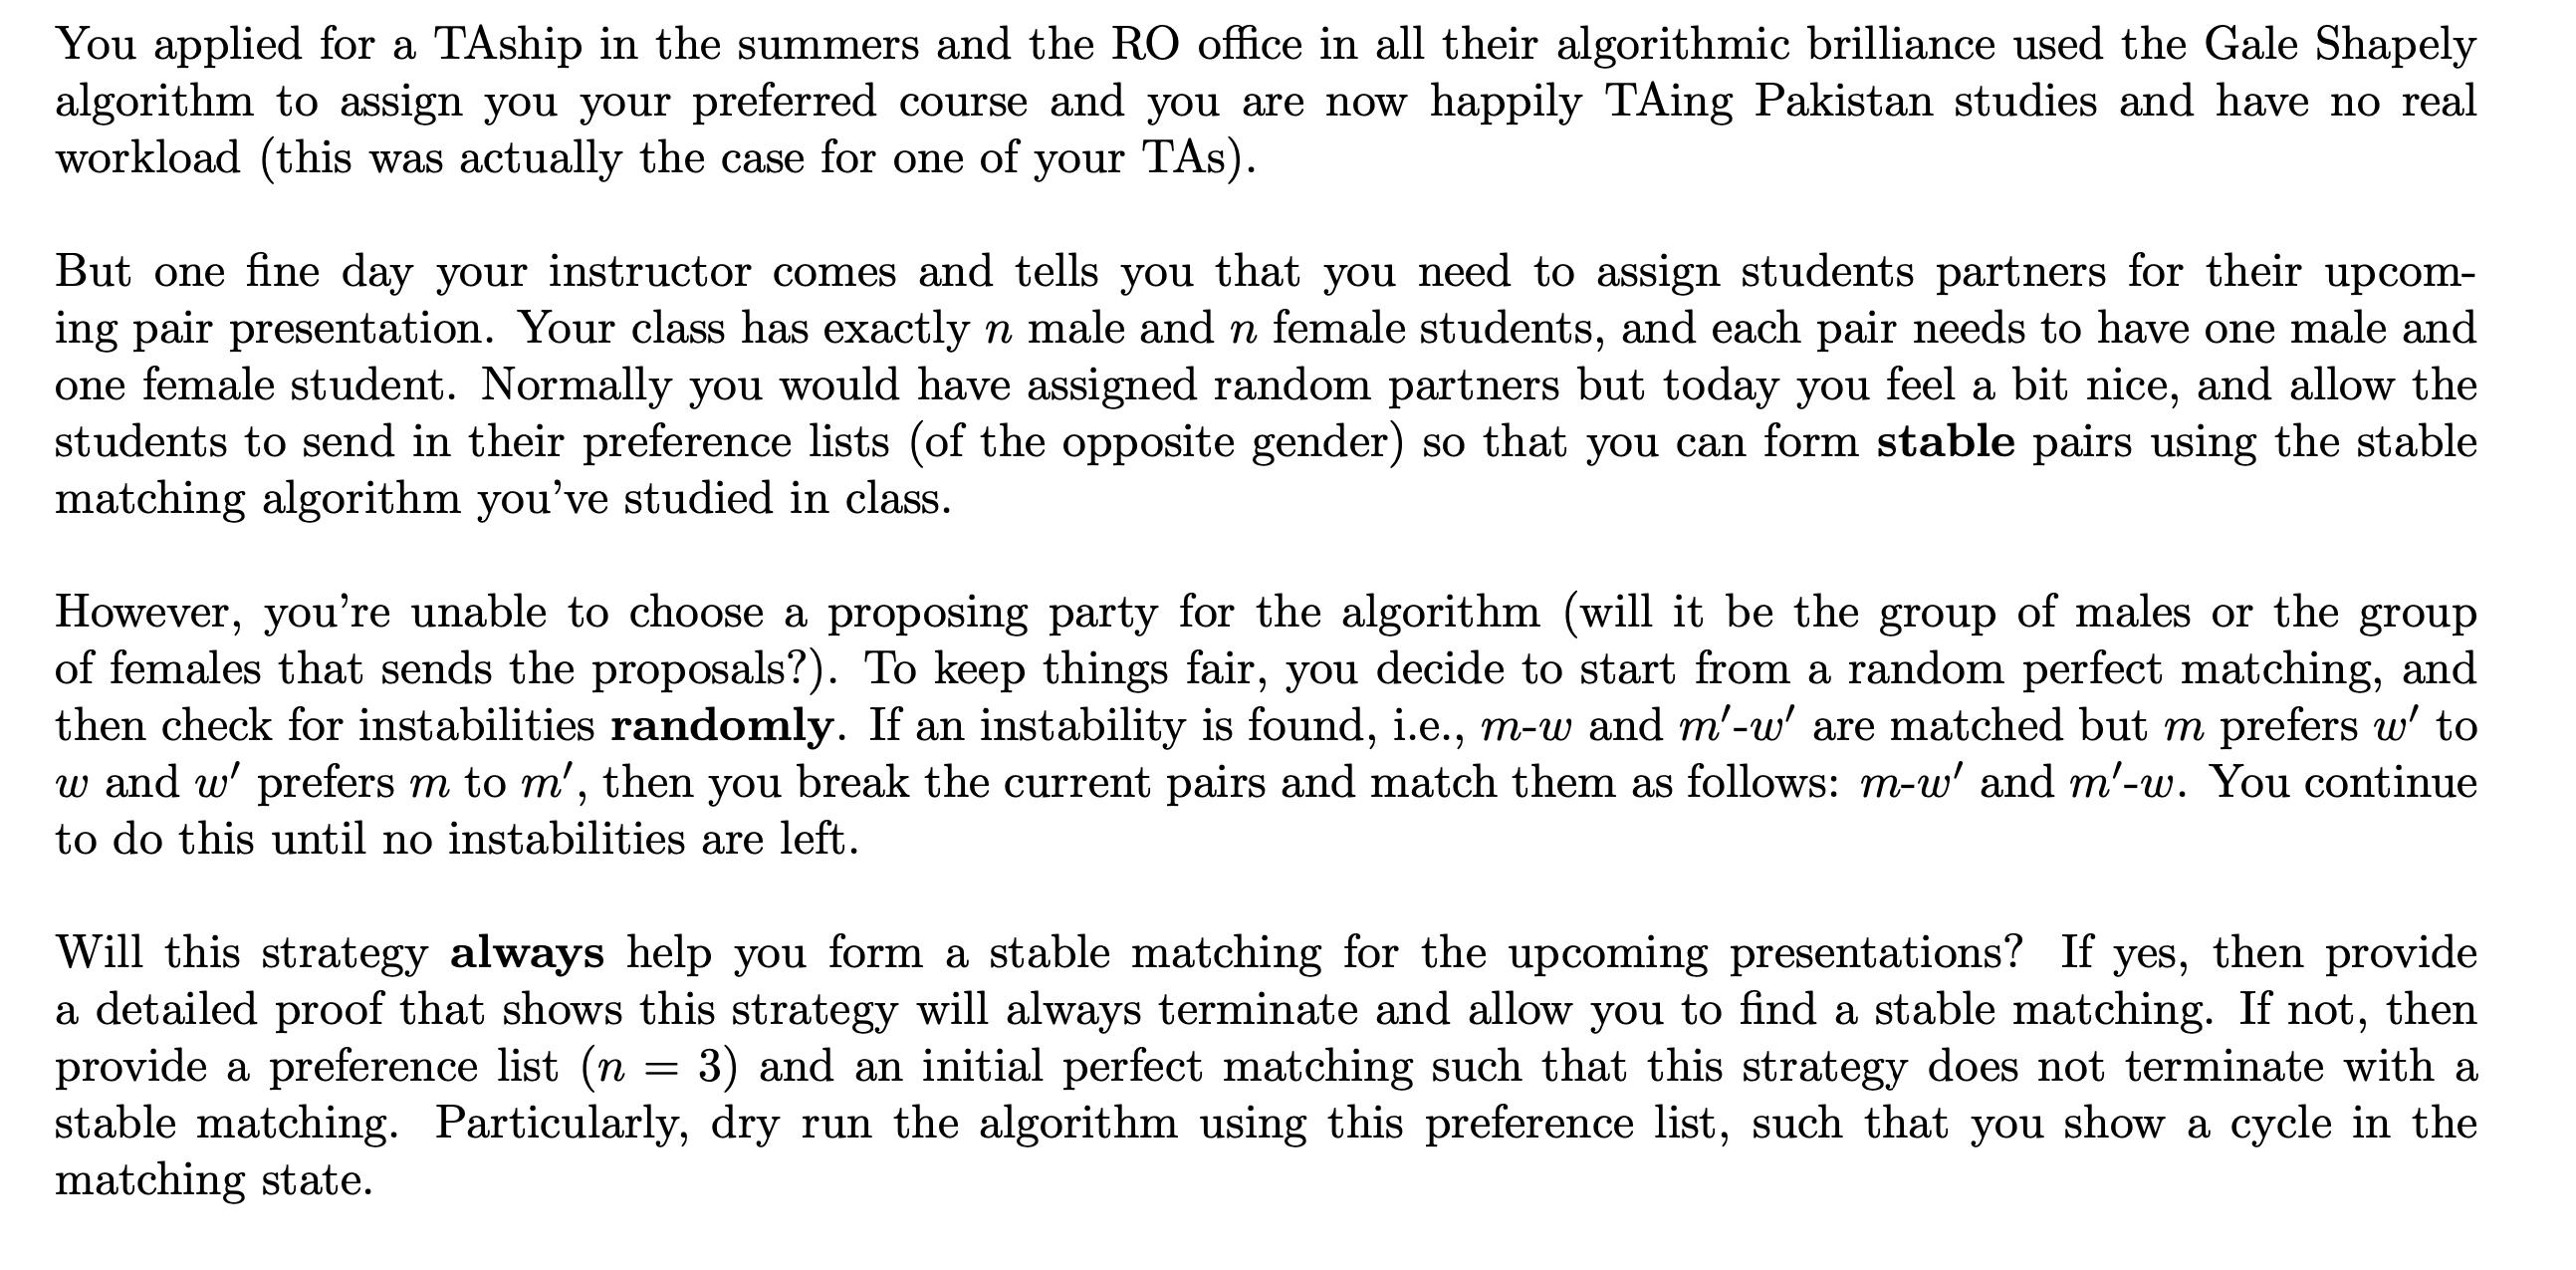 You applied for a TAship in the summers and the RO office in all their algorithmic brilliance used the Gale